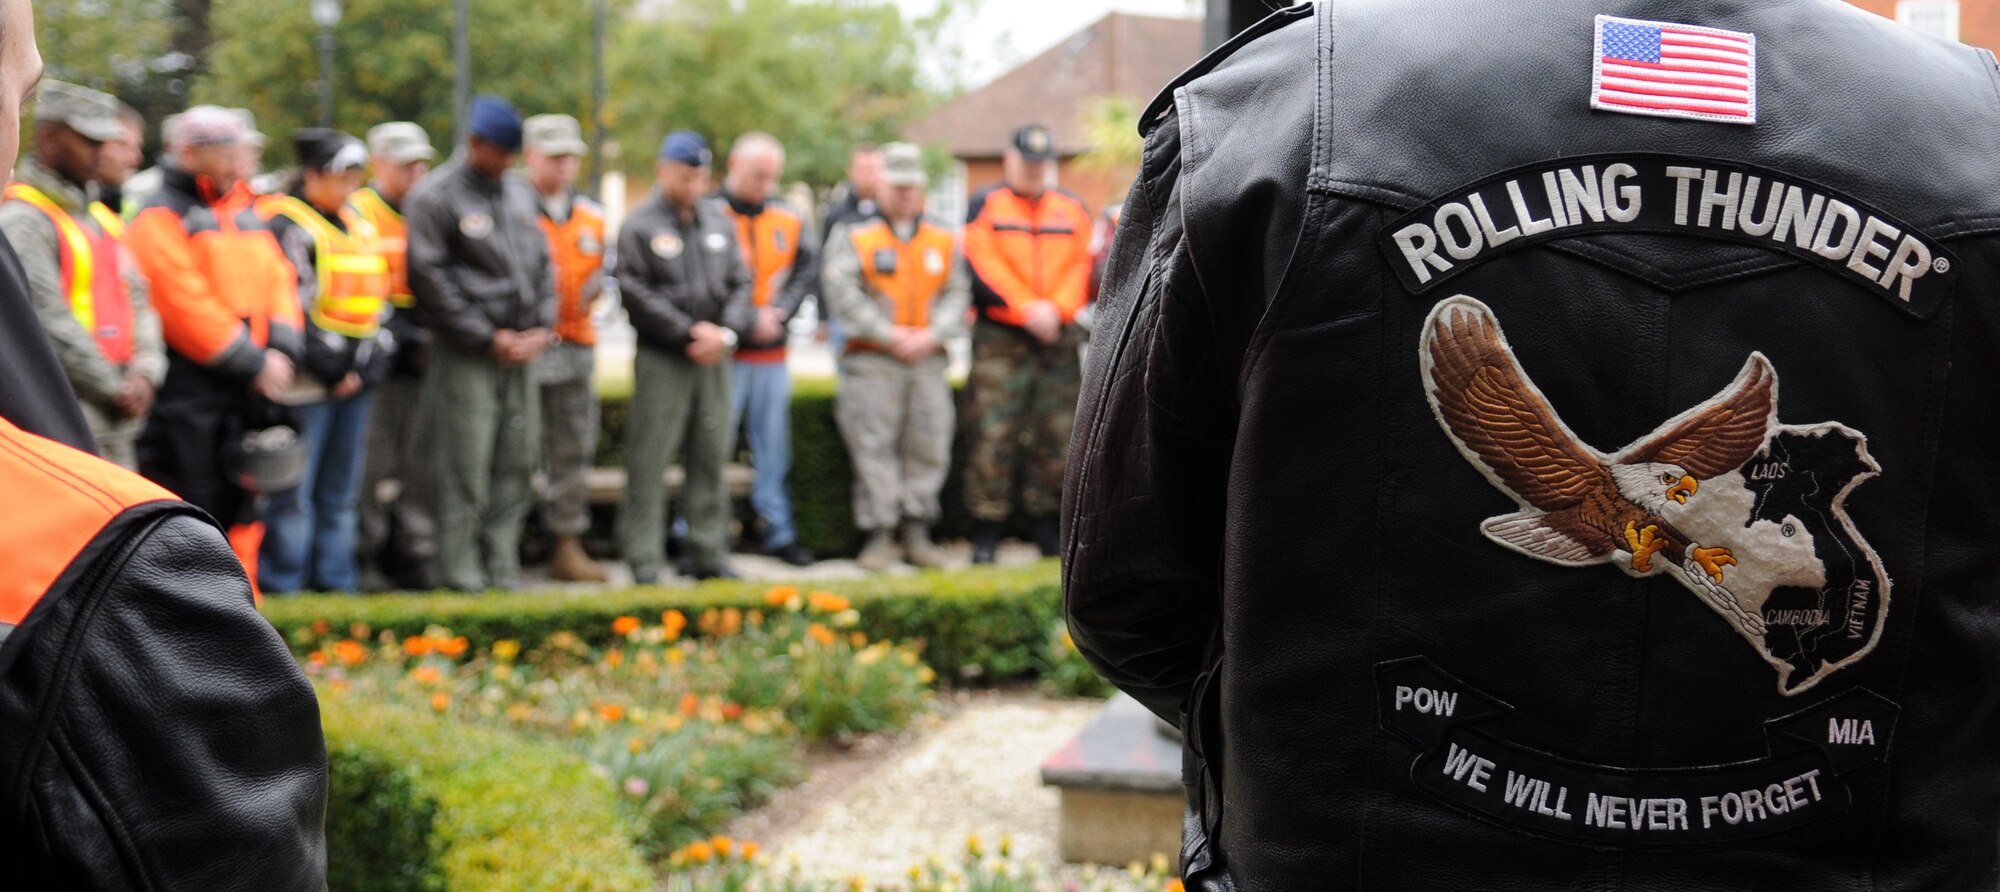 RAF MILDENHALL, England – A jacket reads “Rolling Thunder, we will never forget” as a group of motorcyclist have a moment of silence at the Prisoner of War/Missing in Action memorial Sept 15. The ceremony was one of several events to remember and honor those men and women who were POW/MIA. (U.S. Air Force photo/ Staff Sgt. Jerry Fleshman)